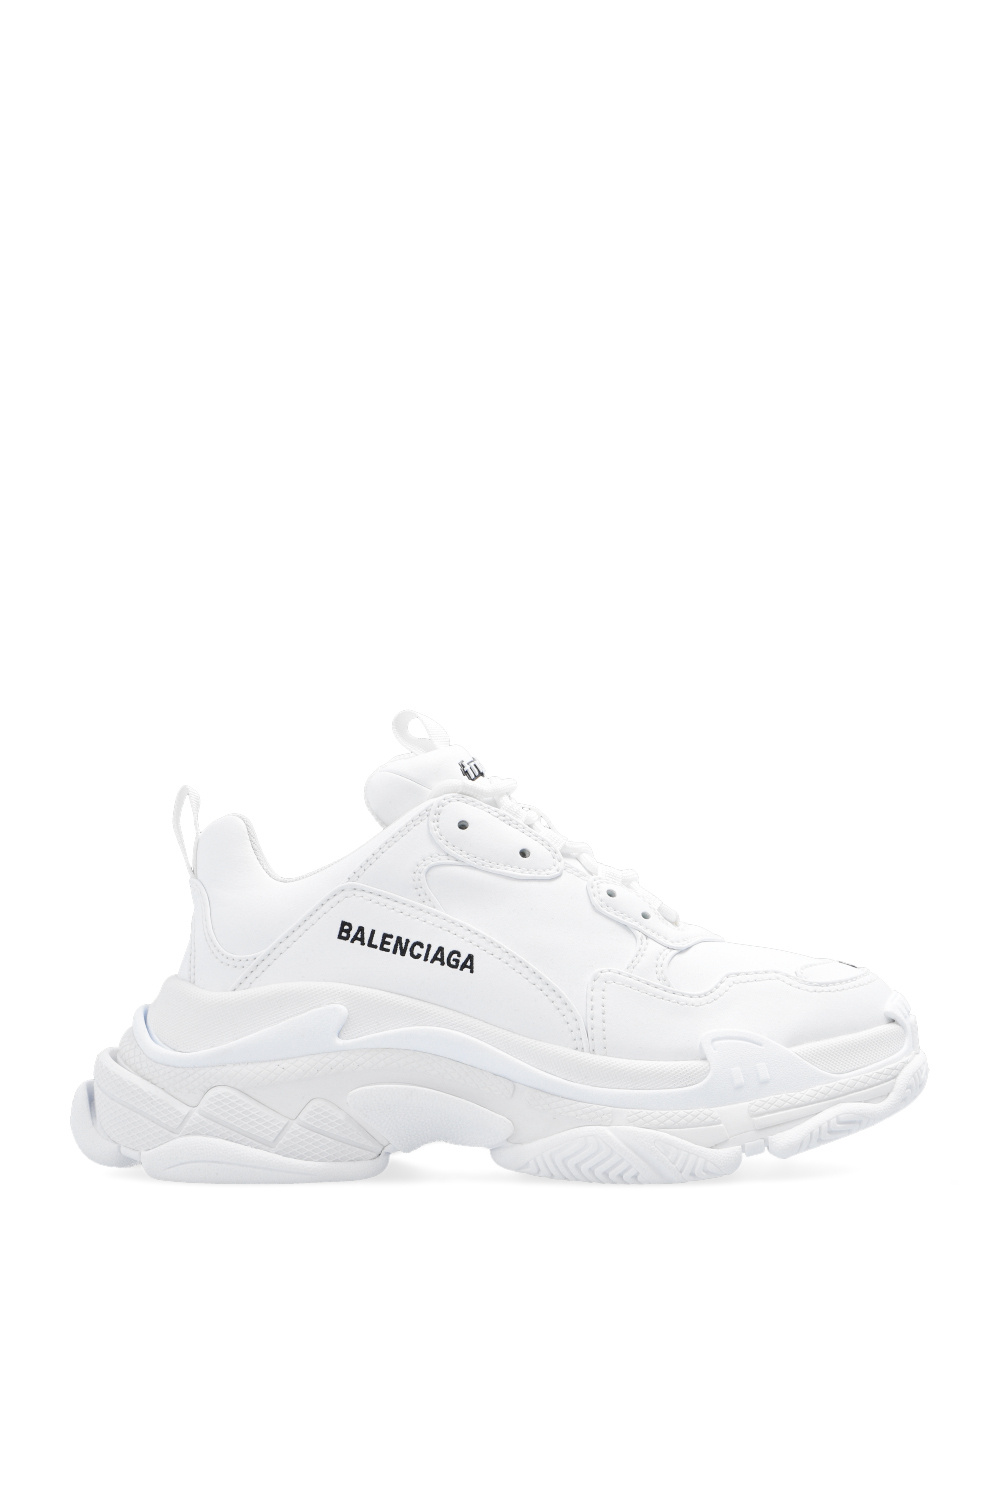 Abandon toothache Melodious Triple S' sneakers Balenciaga - IetpShops Germany - Sneakers NEW BALANCE  GM500SR1 Gelb